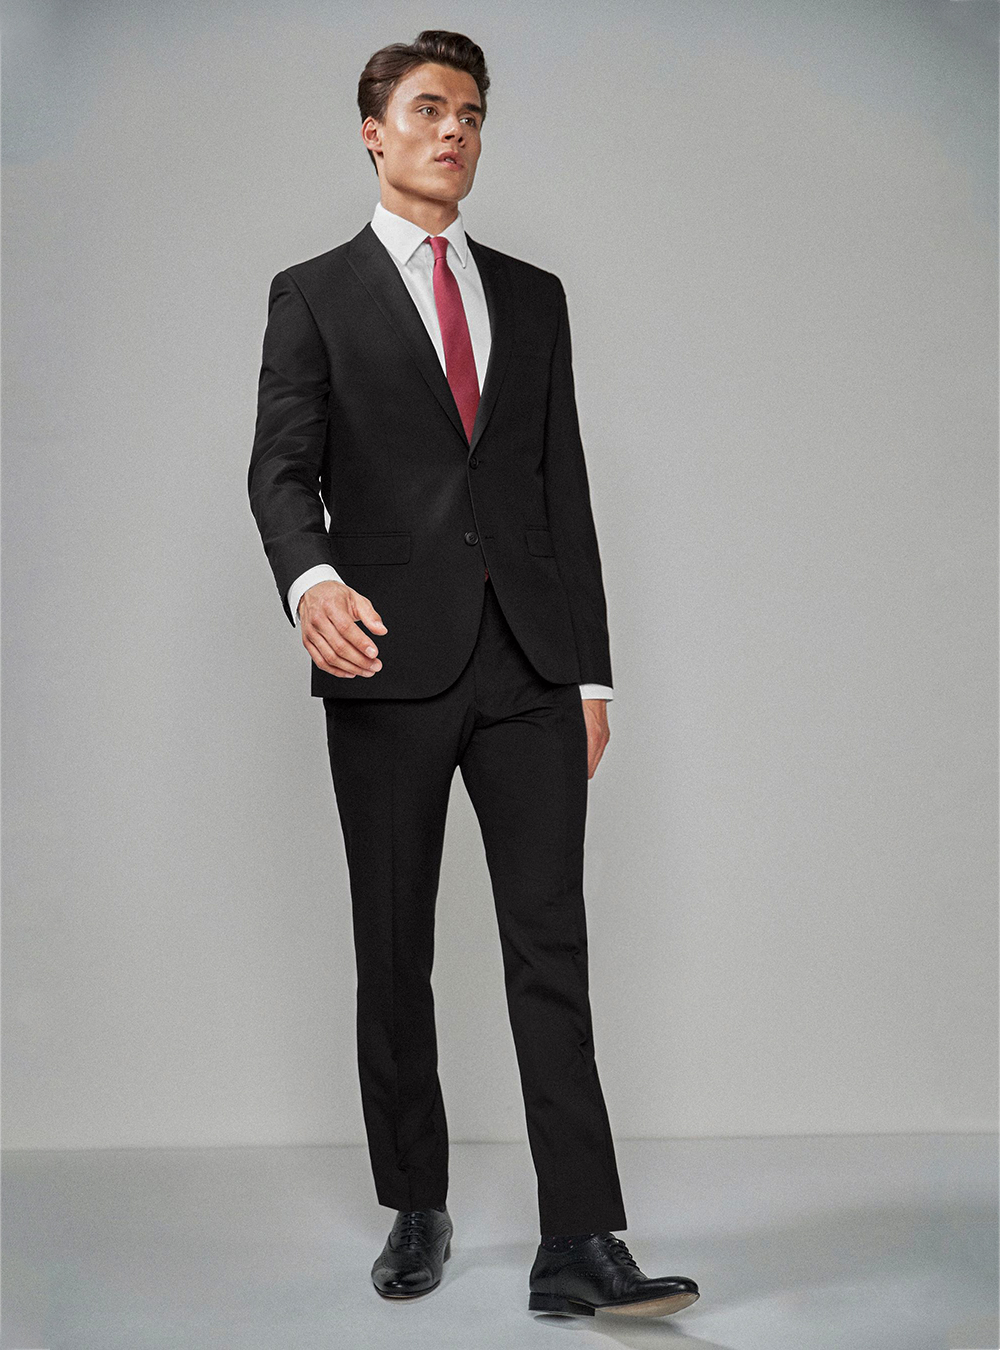 Black suit, white dress shirt, red tie and black brogue shoes